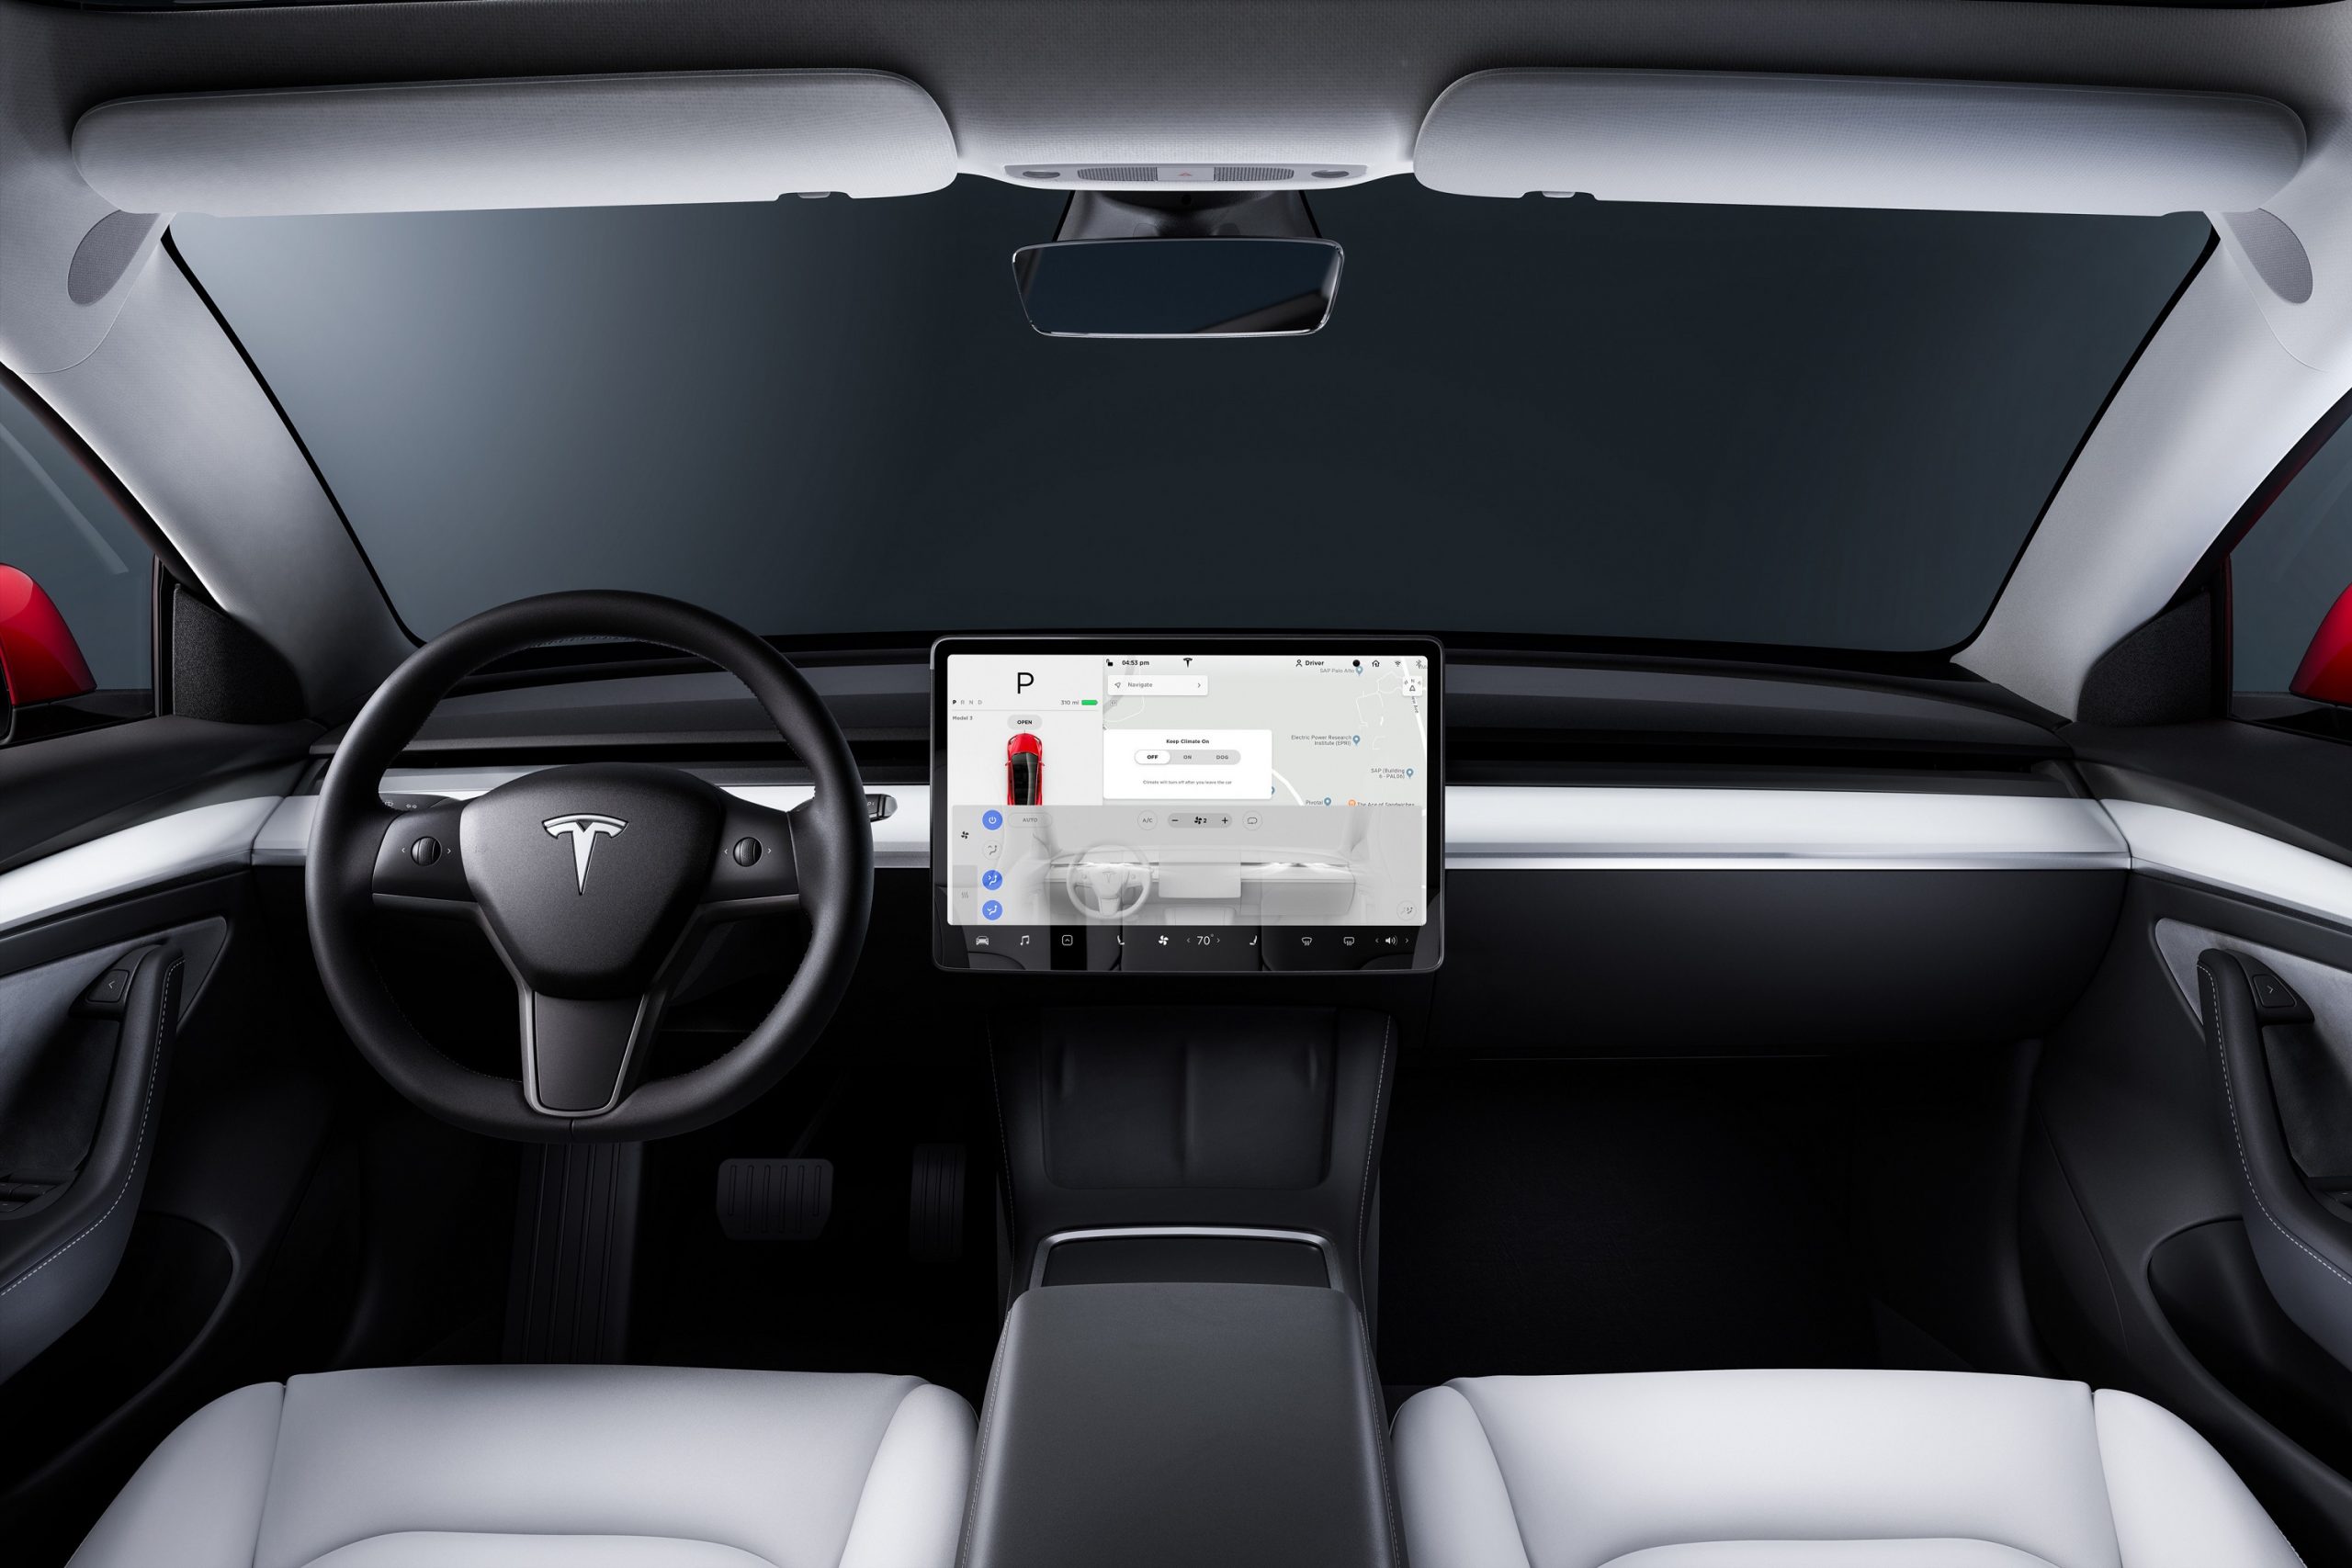 The Tesla Model 3 is home to one of the worst car trends: climate controls buried in touchscreens, shown in this shot of a Model 3 interior